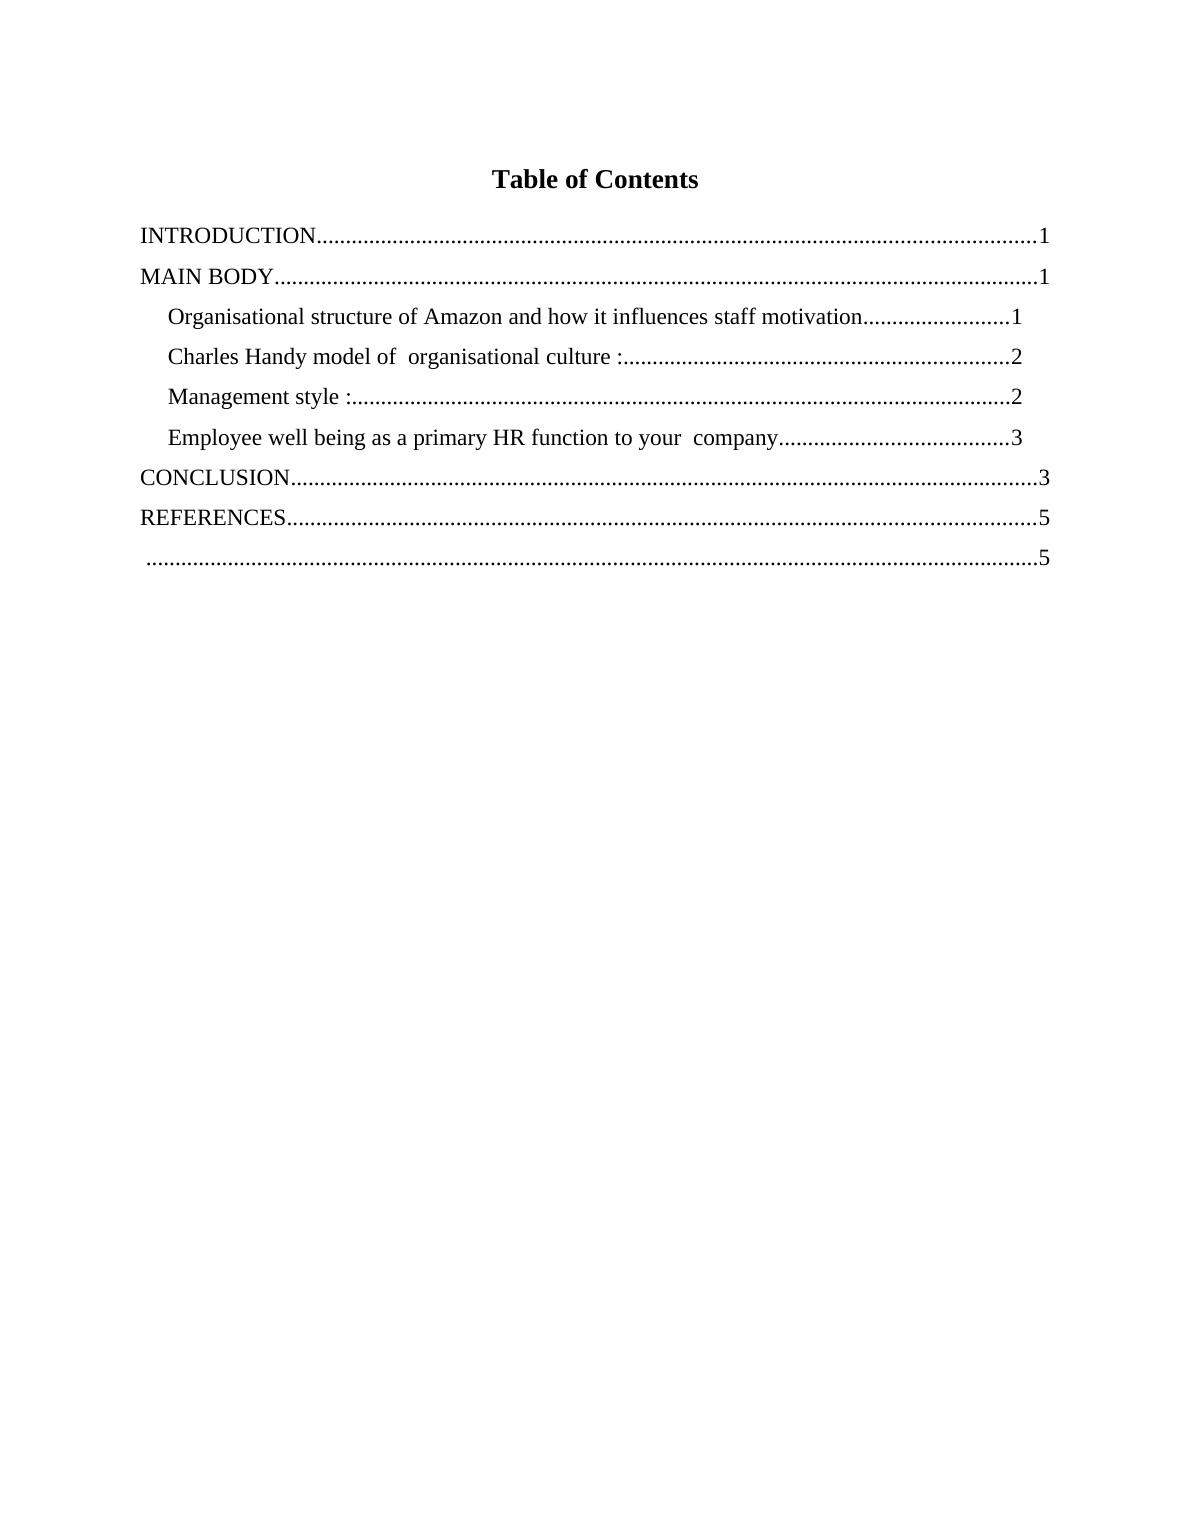 Introduction to Human Resource Management - Assignment Sample_2